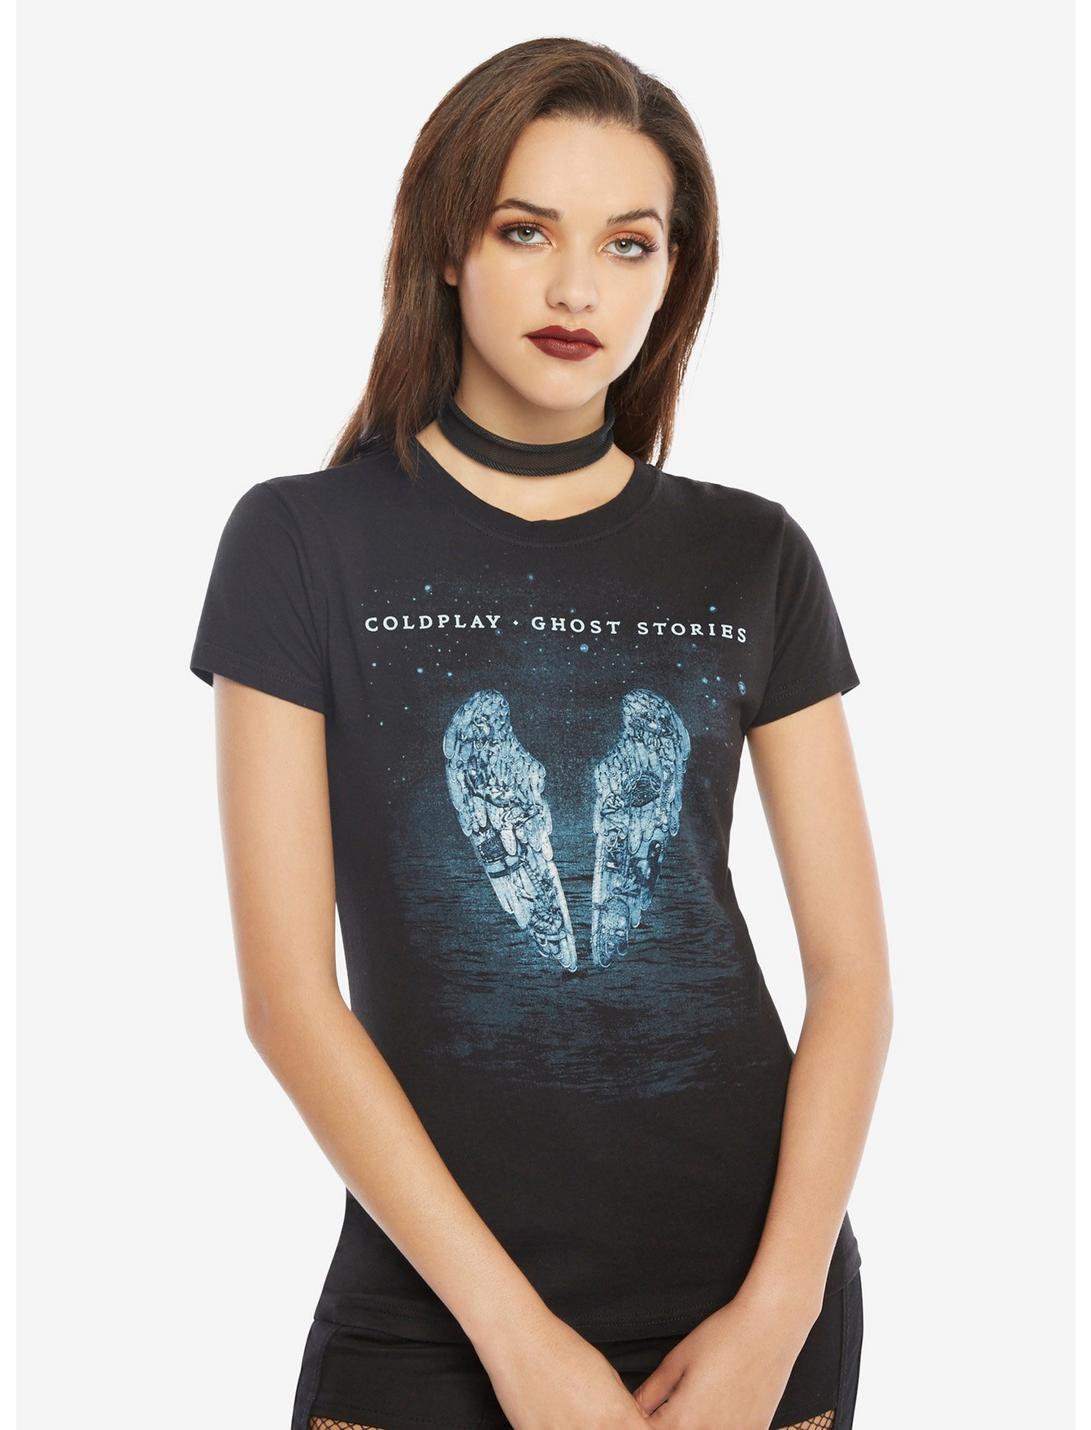 Coldplay Ghost Stories Cover Girls T-Shirt, BLACK, hi-res